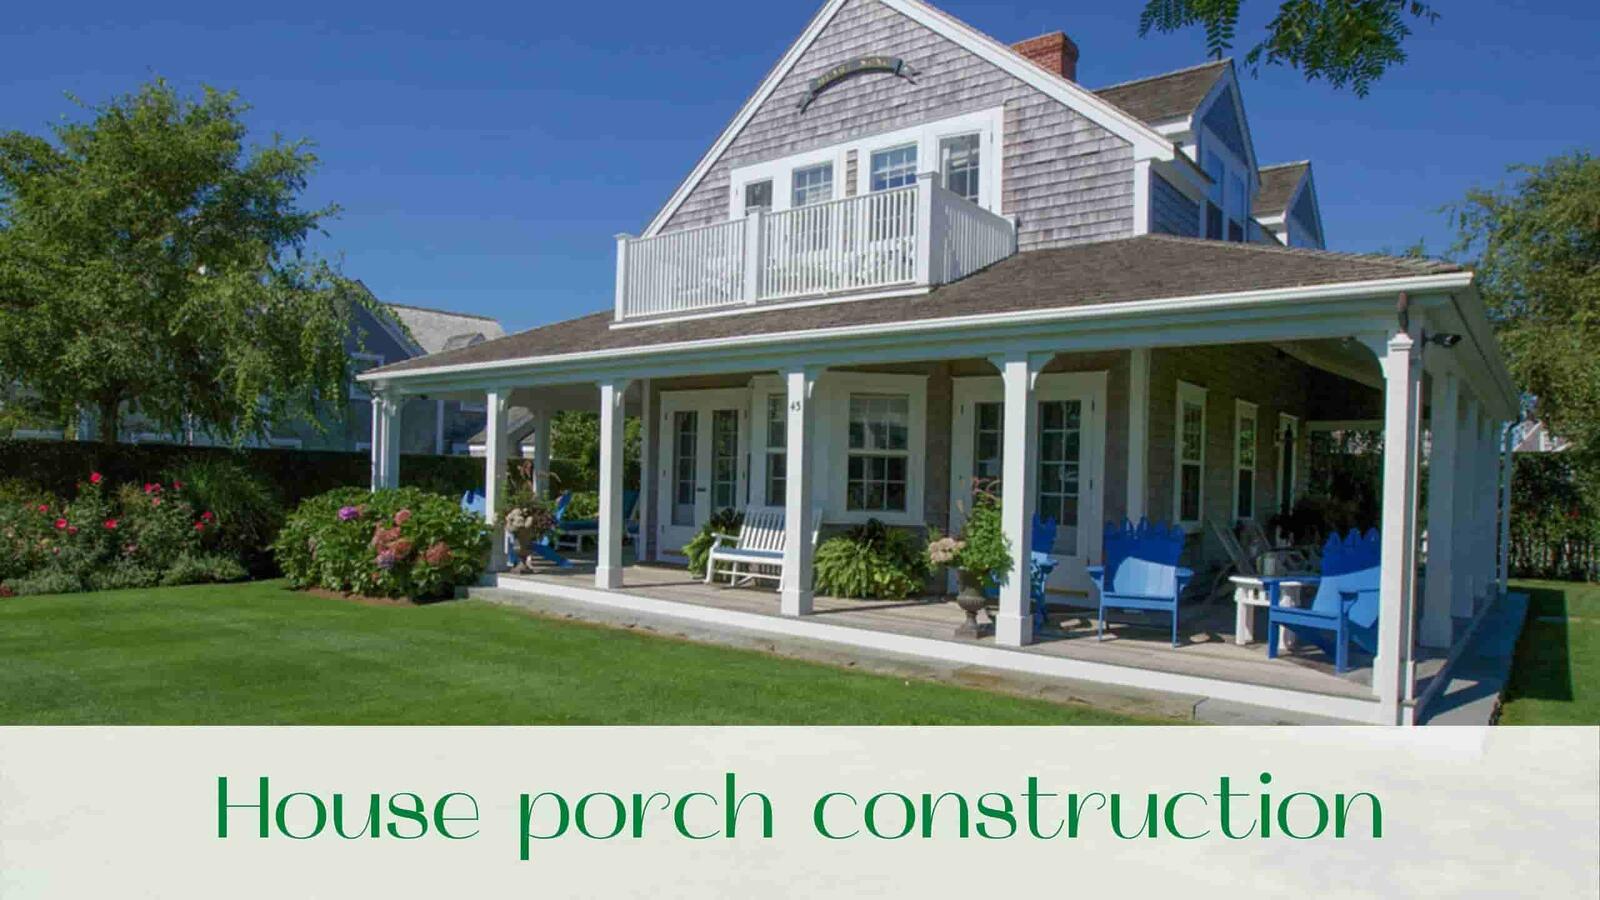 House porch construction in Toronto and Ontario. What do you need to know before starting construction?